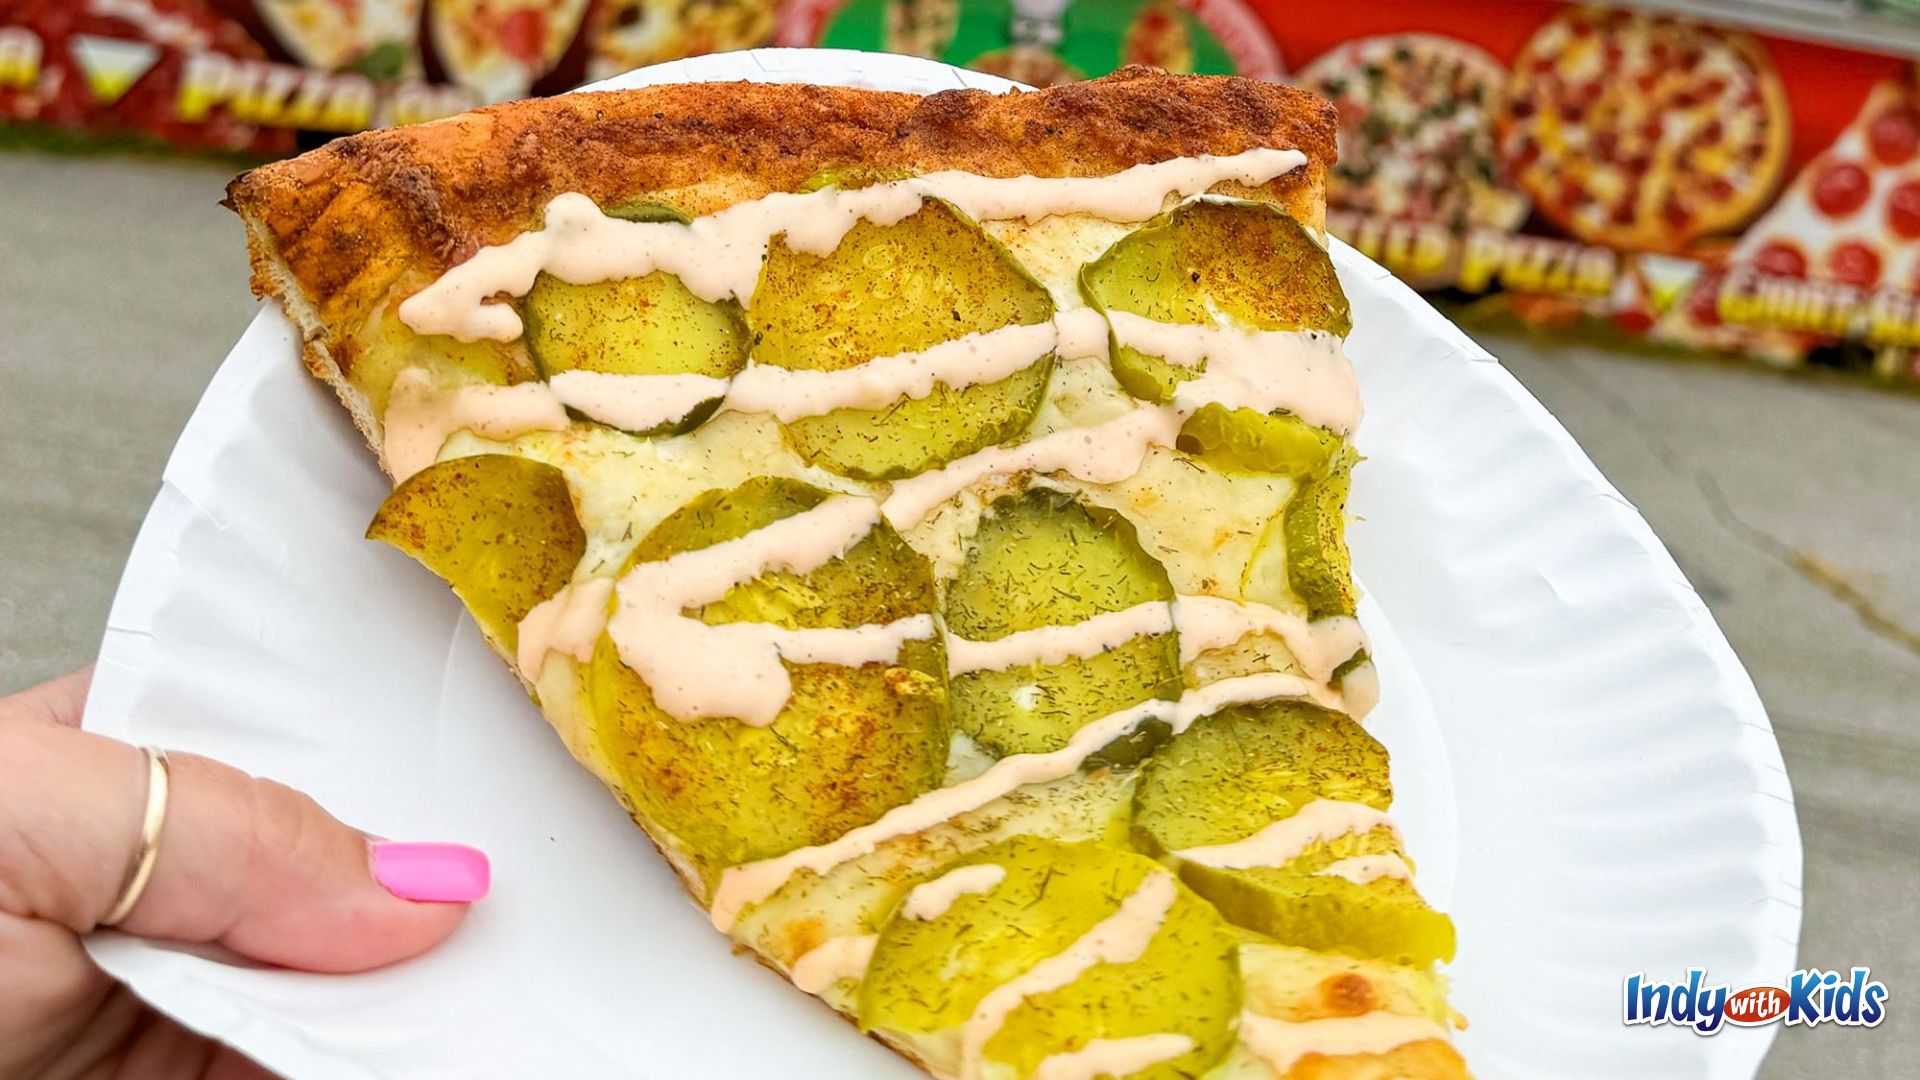 Indiana State Fair Food: A slice of pizza topped with pickles and a drizzle of spicy sauce.